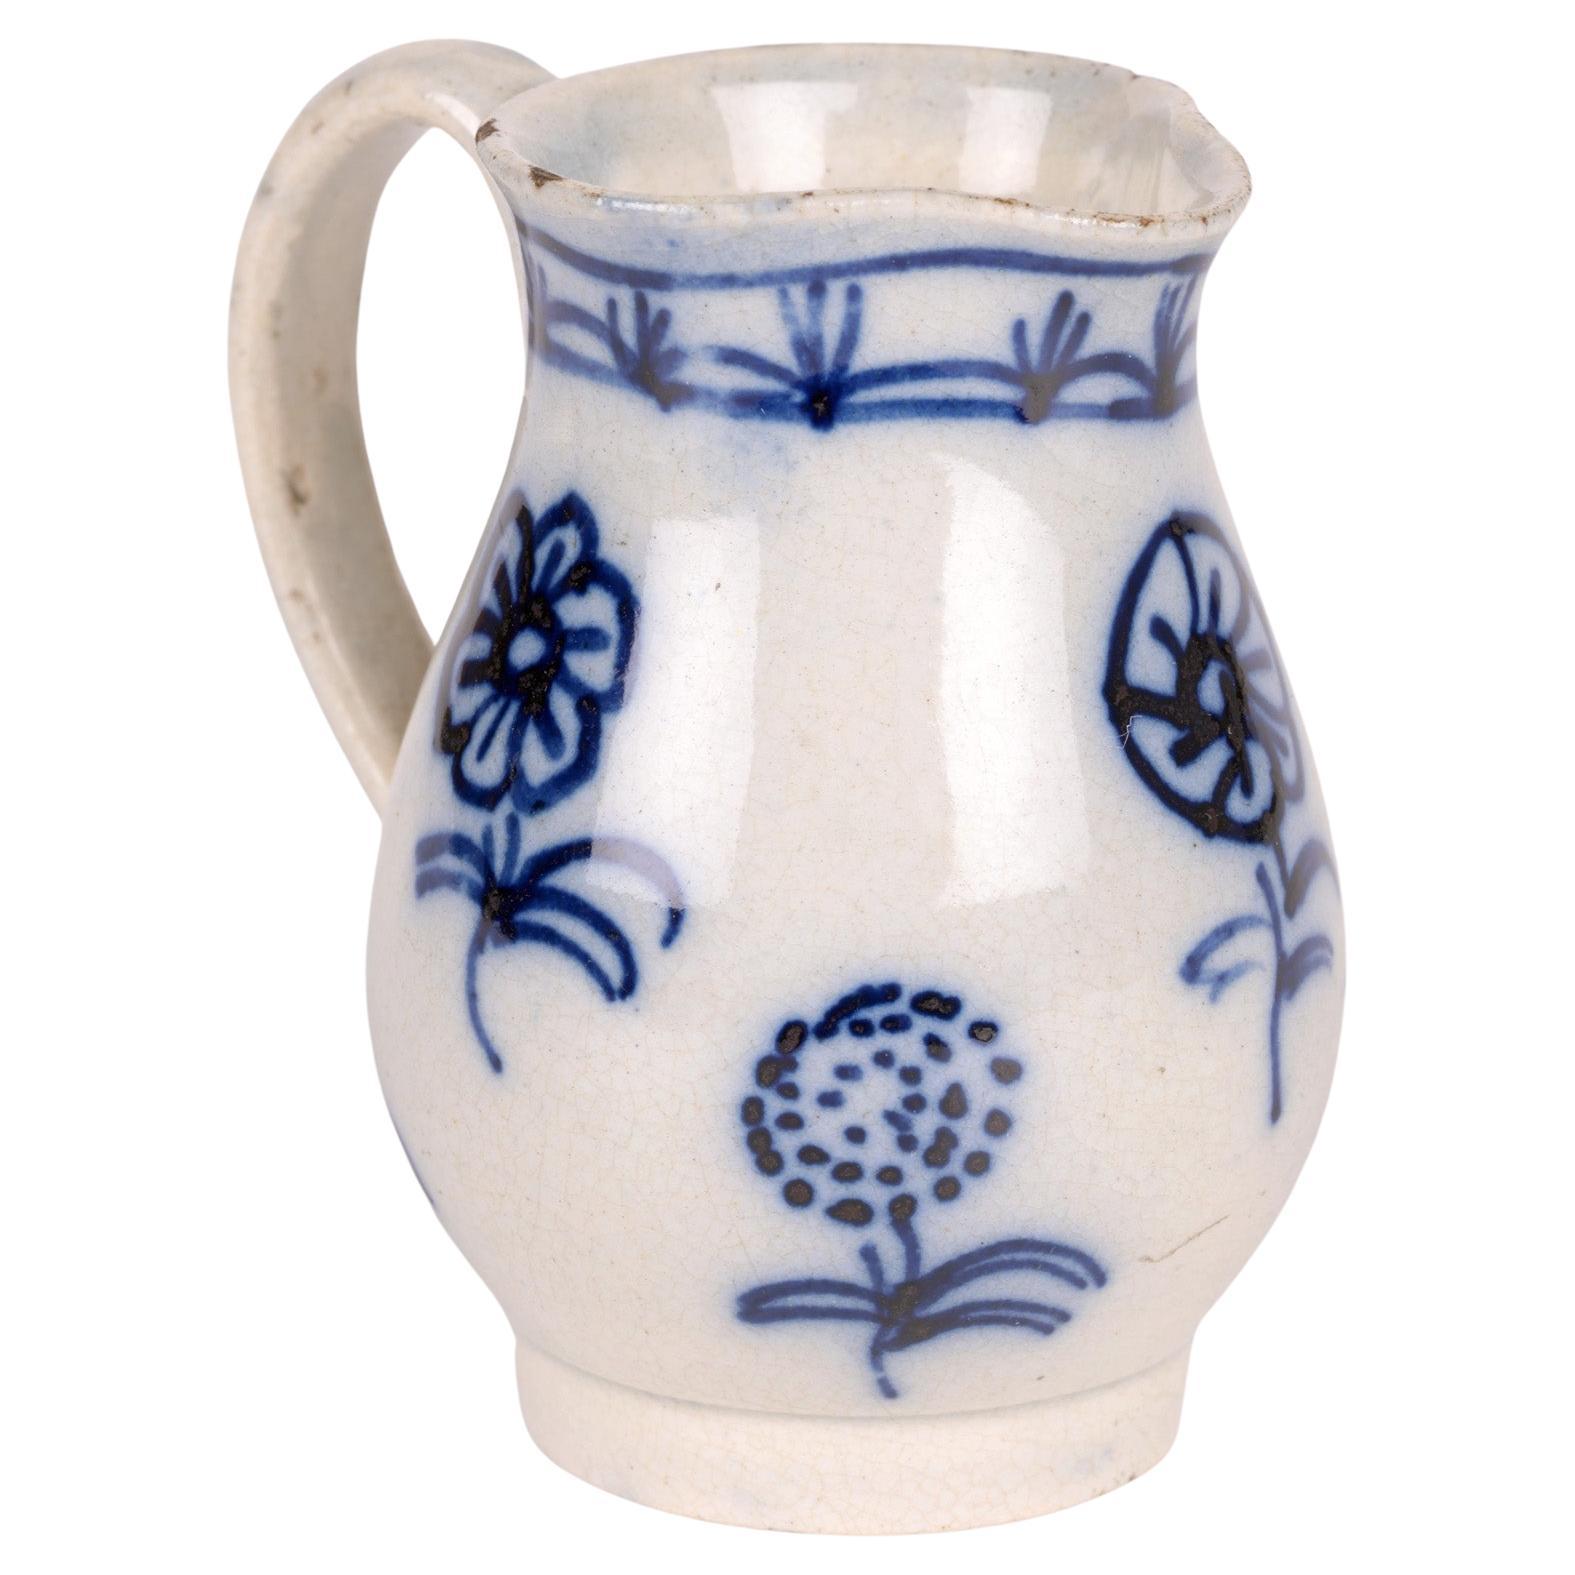 Miniature Antique Pearlware Blue & White Painted Jug For Sale